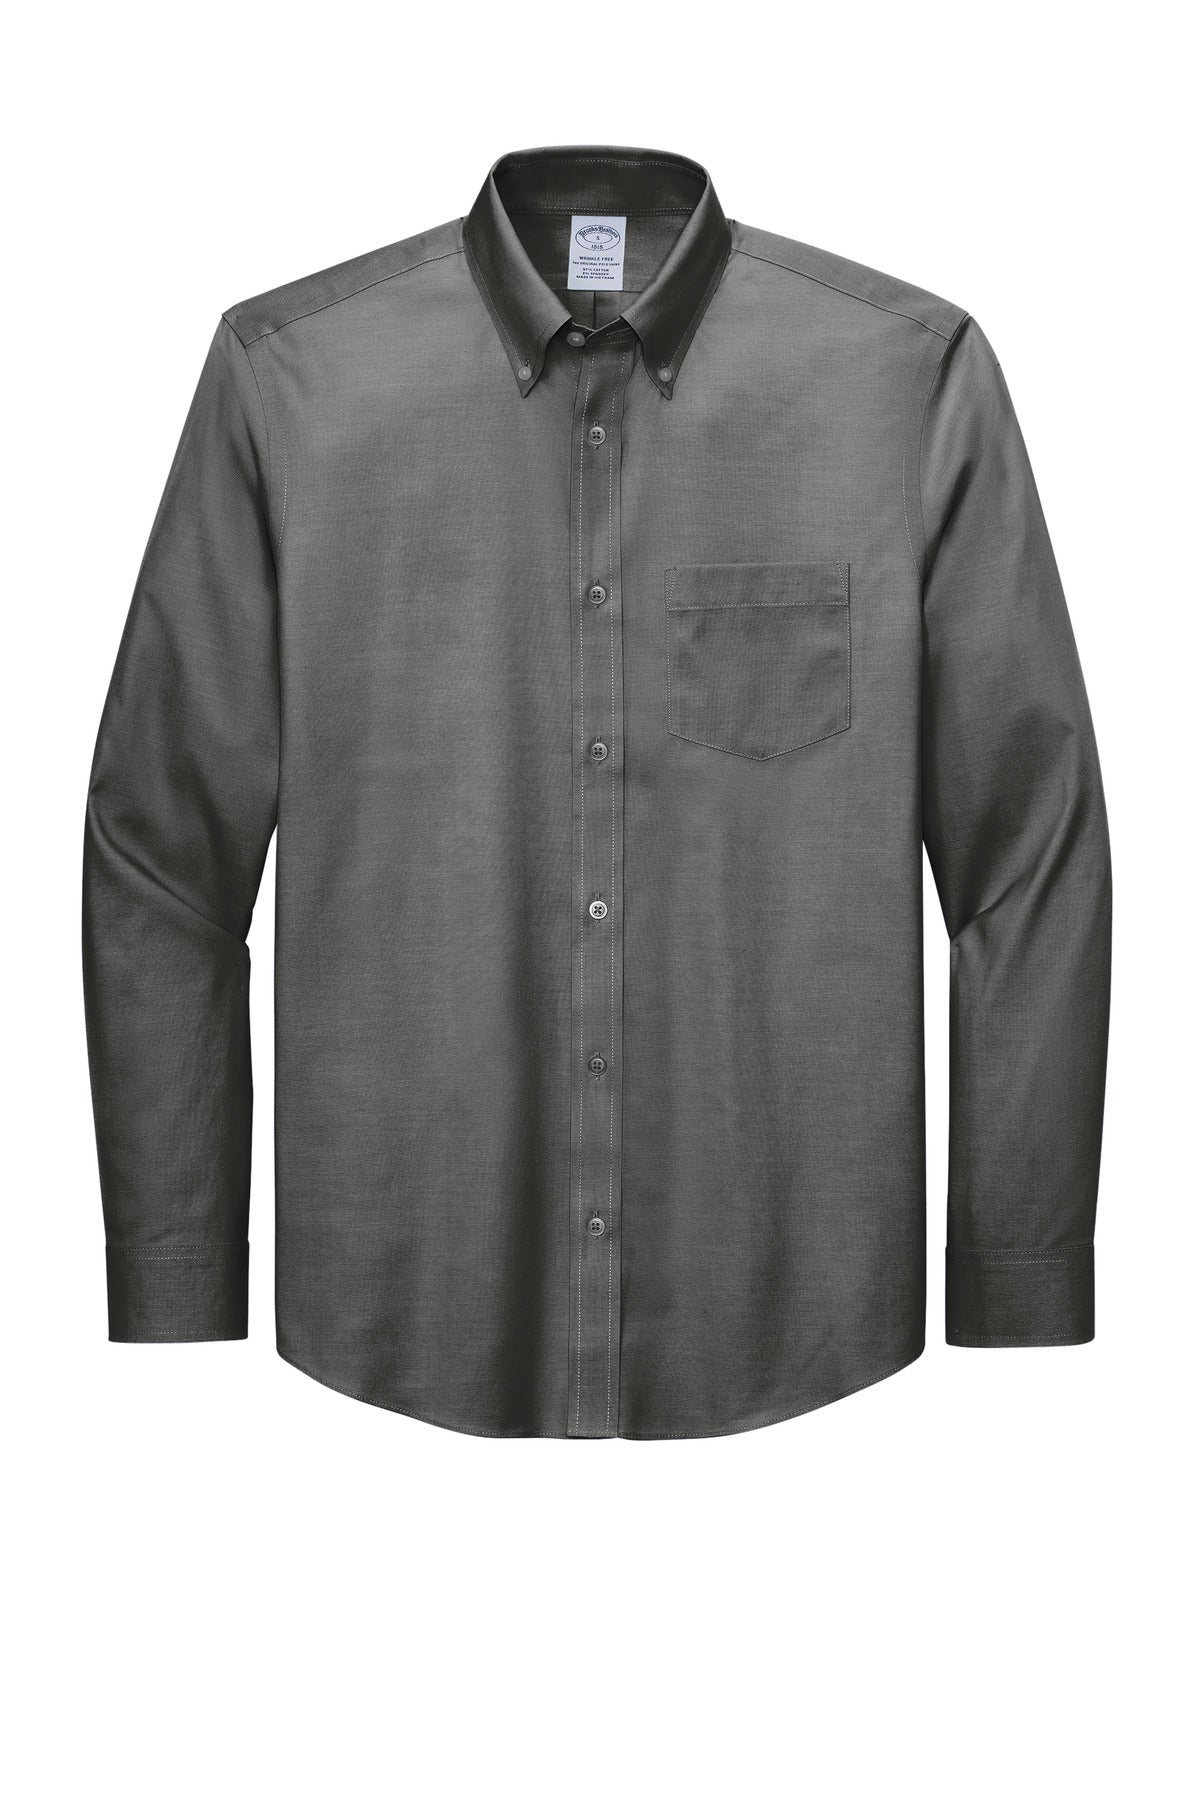 Brooks Brothers® Wrinkle-Free Stretch Pinpoint Shirt BB18000